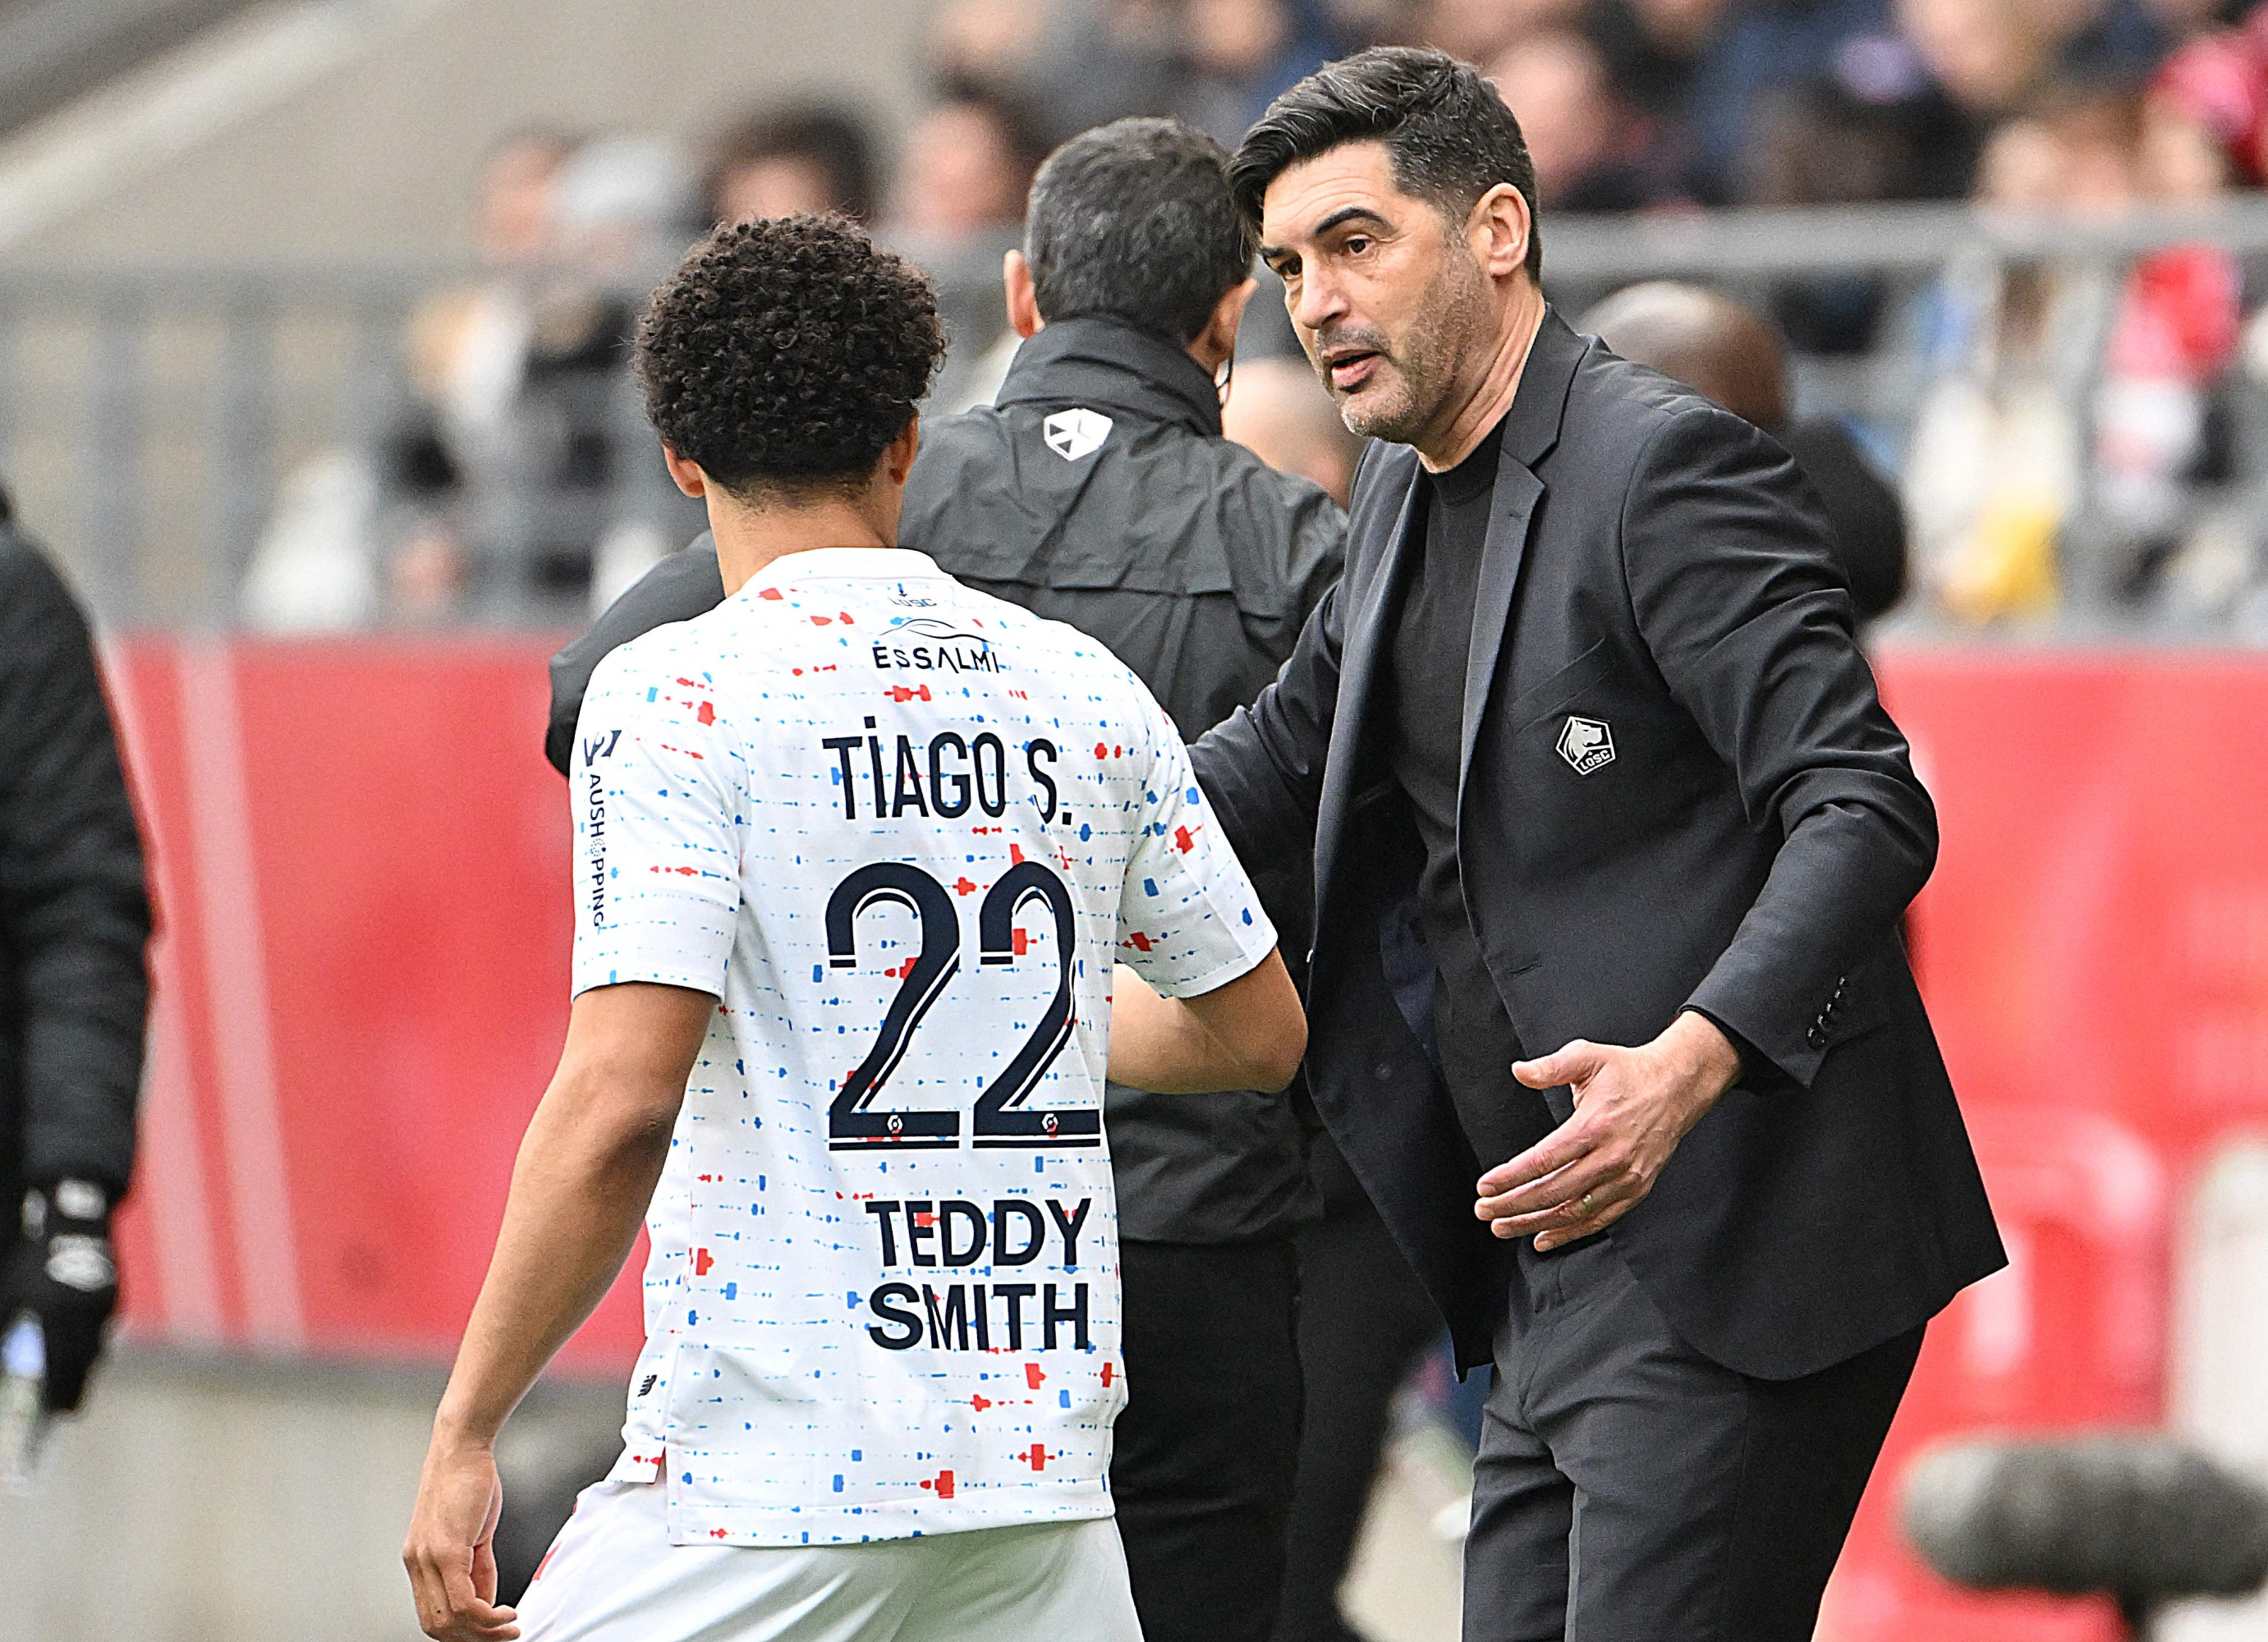 Lille's Portuguese head coach Paulo Fonseca (R) speaks with Lille's Portuguese defender #22 Tiago Santos during the French L1 football match between Stade de Reims and Lille LOSC at the Stade Auguste-Delaune in Reims, northern France on March 2, 2024. (Photo by FRANCOIS NASCIMBENI / AFP)